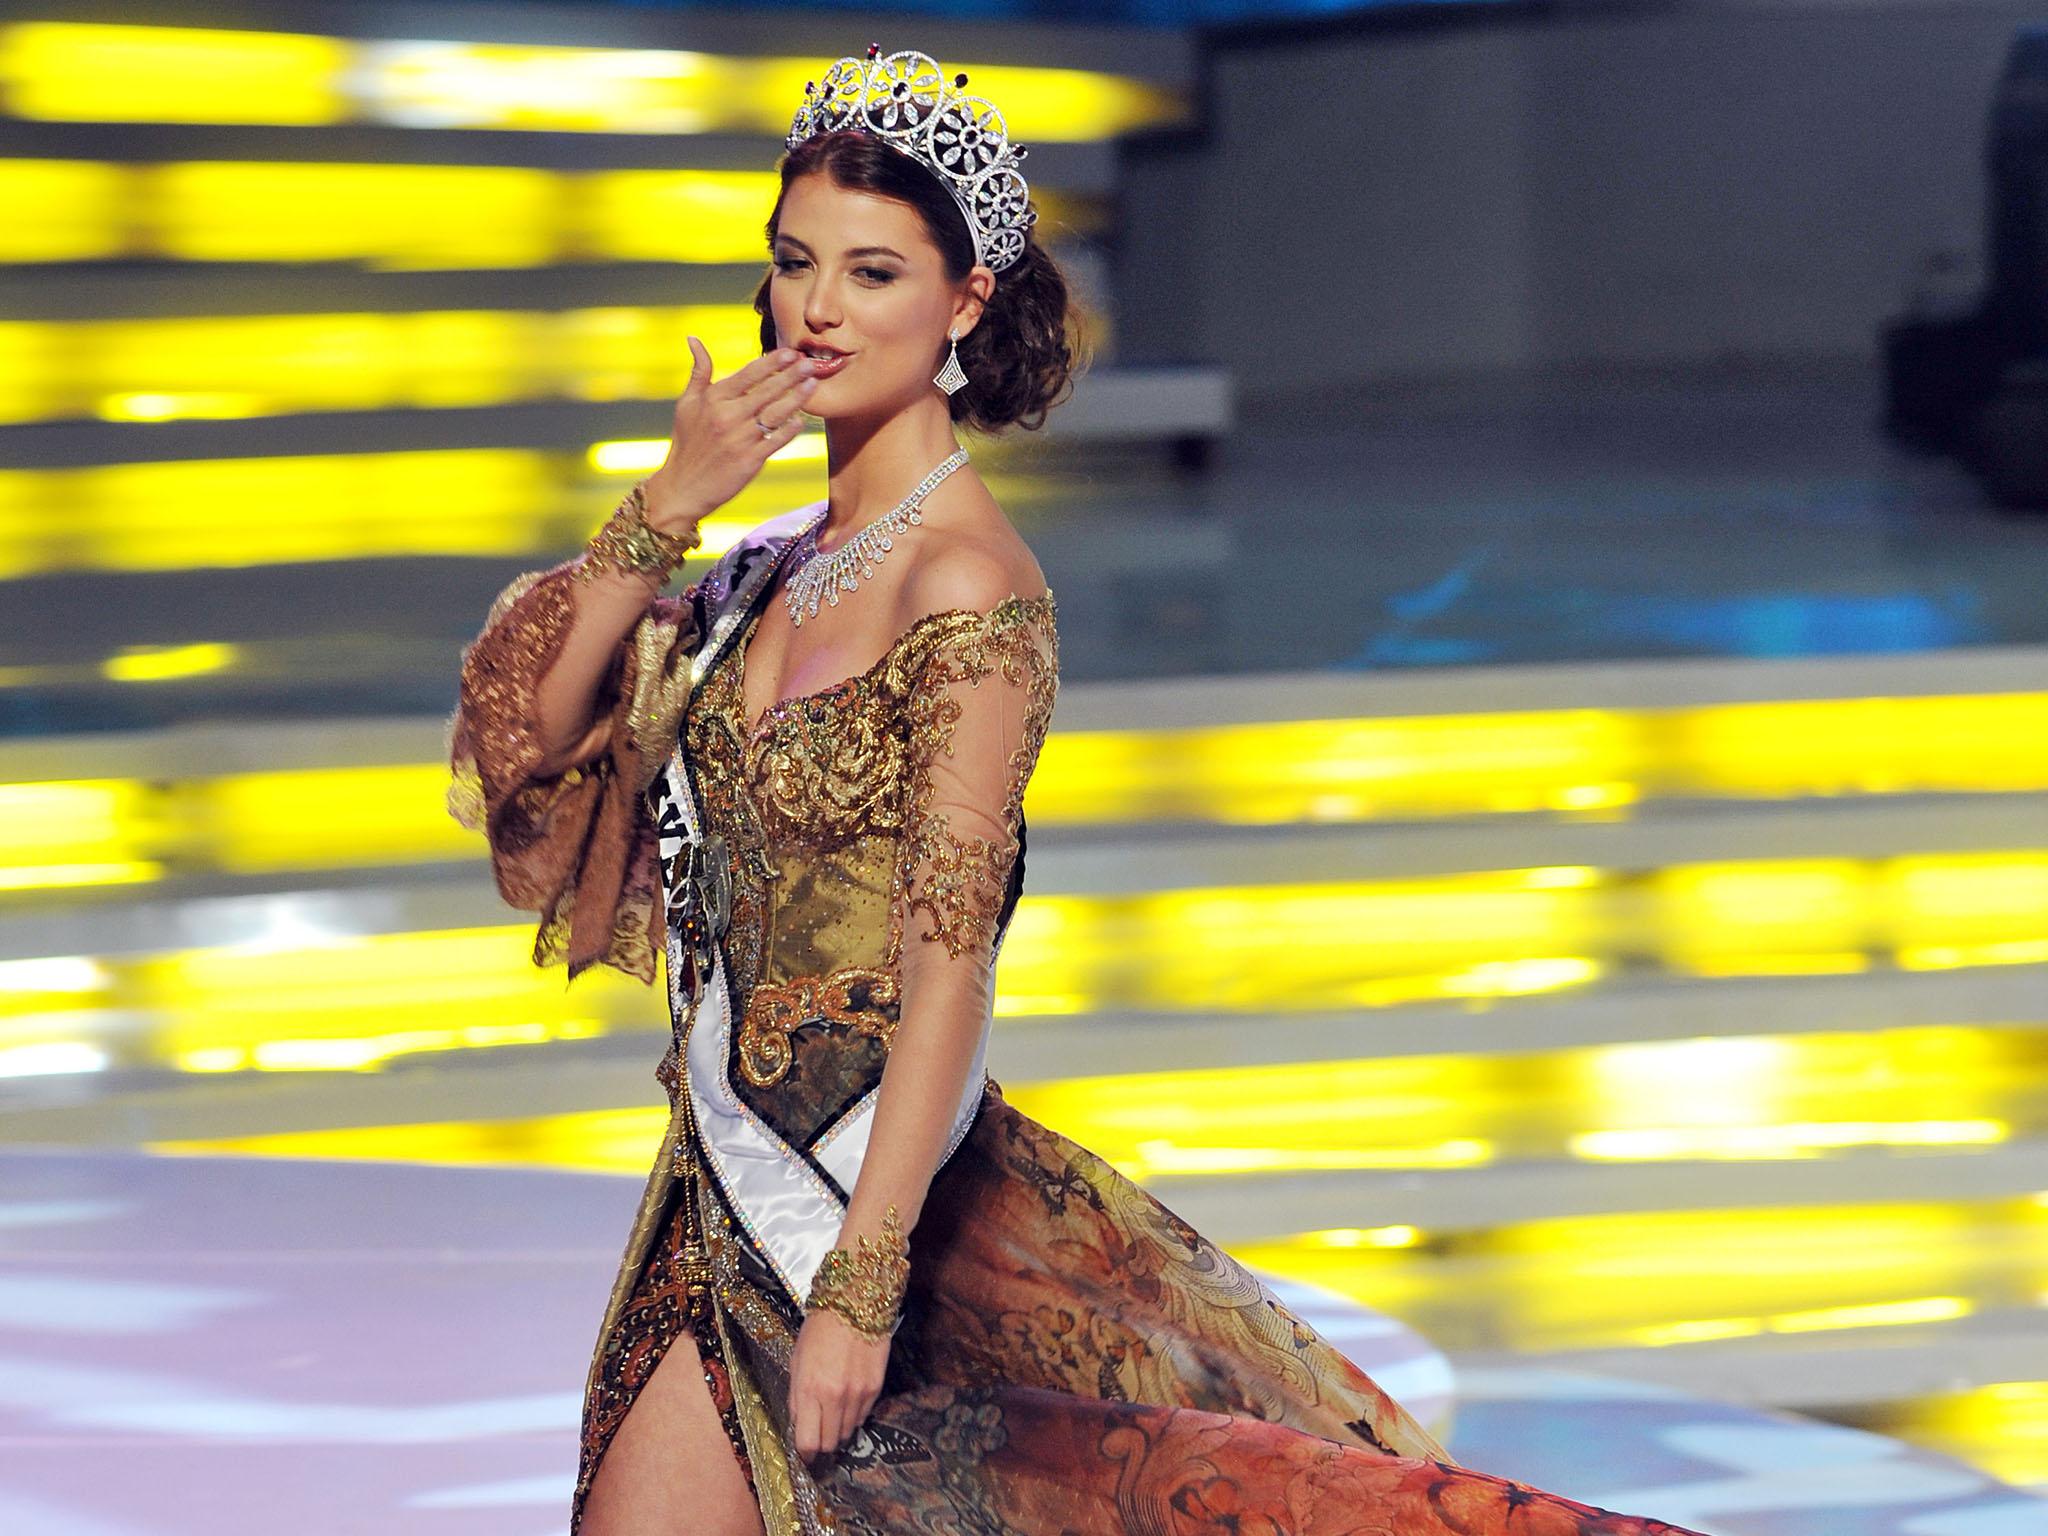 Miss Universe Stefania Fernandez of Venezuela in 2009, when the country was still riding high